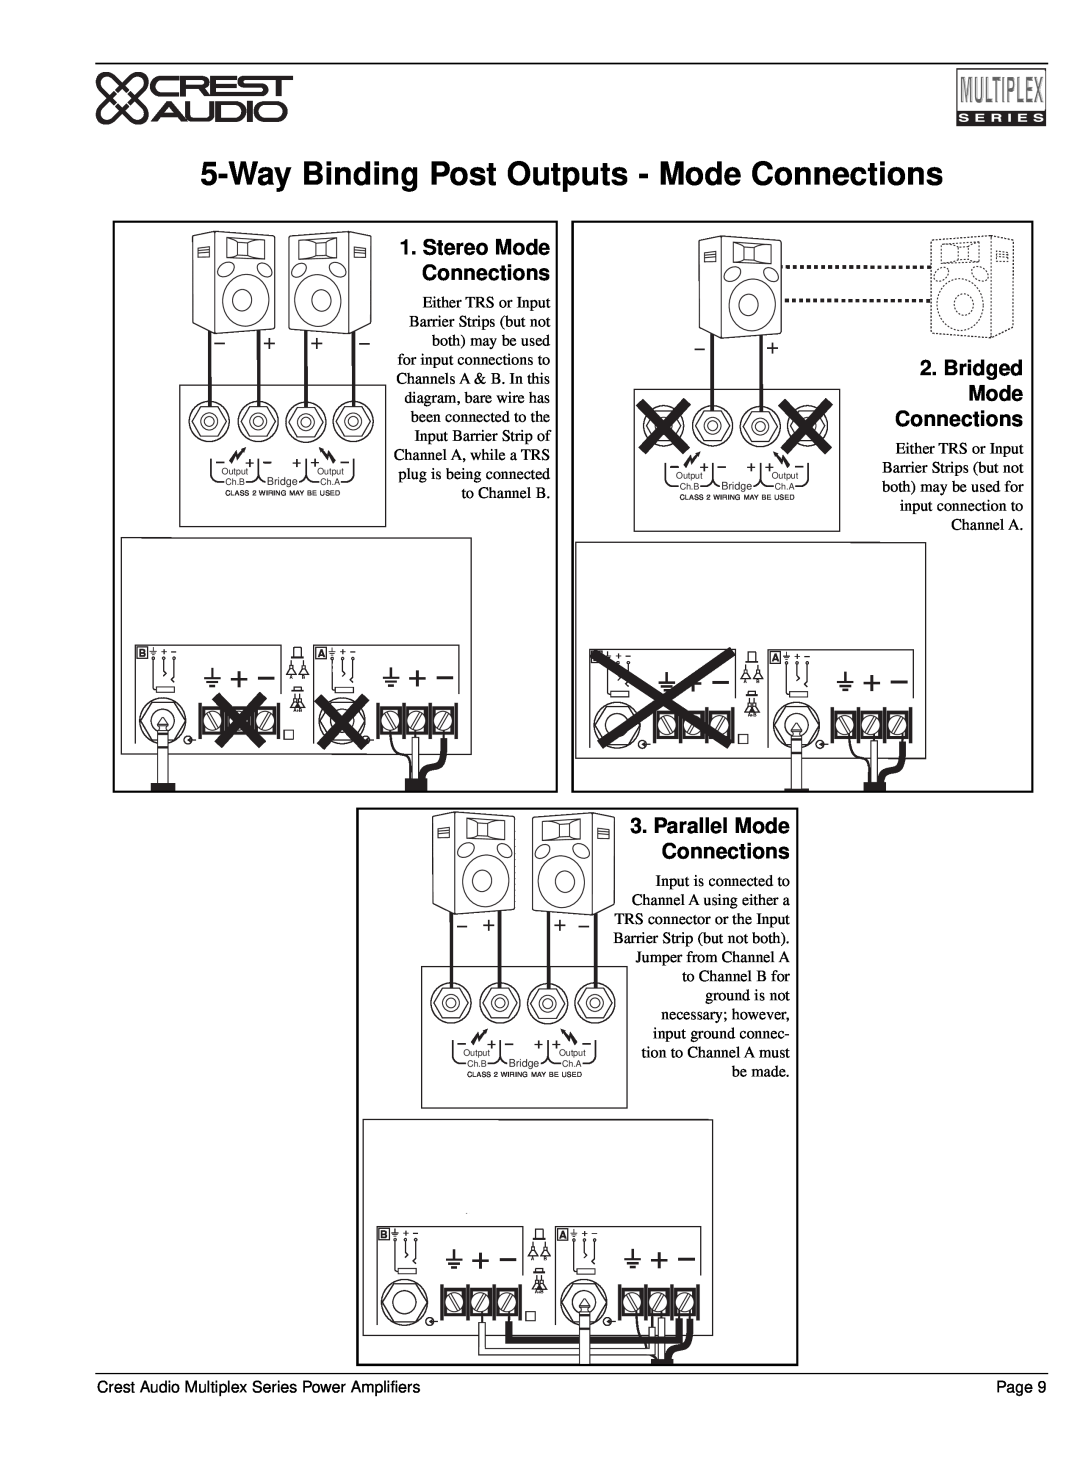 Peavey Multiplex Series WayBinding Post Outputs - Mode Connections, Stereo Mode Connections, Bridged Mode Connections 